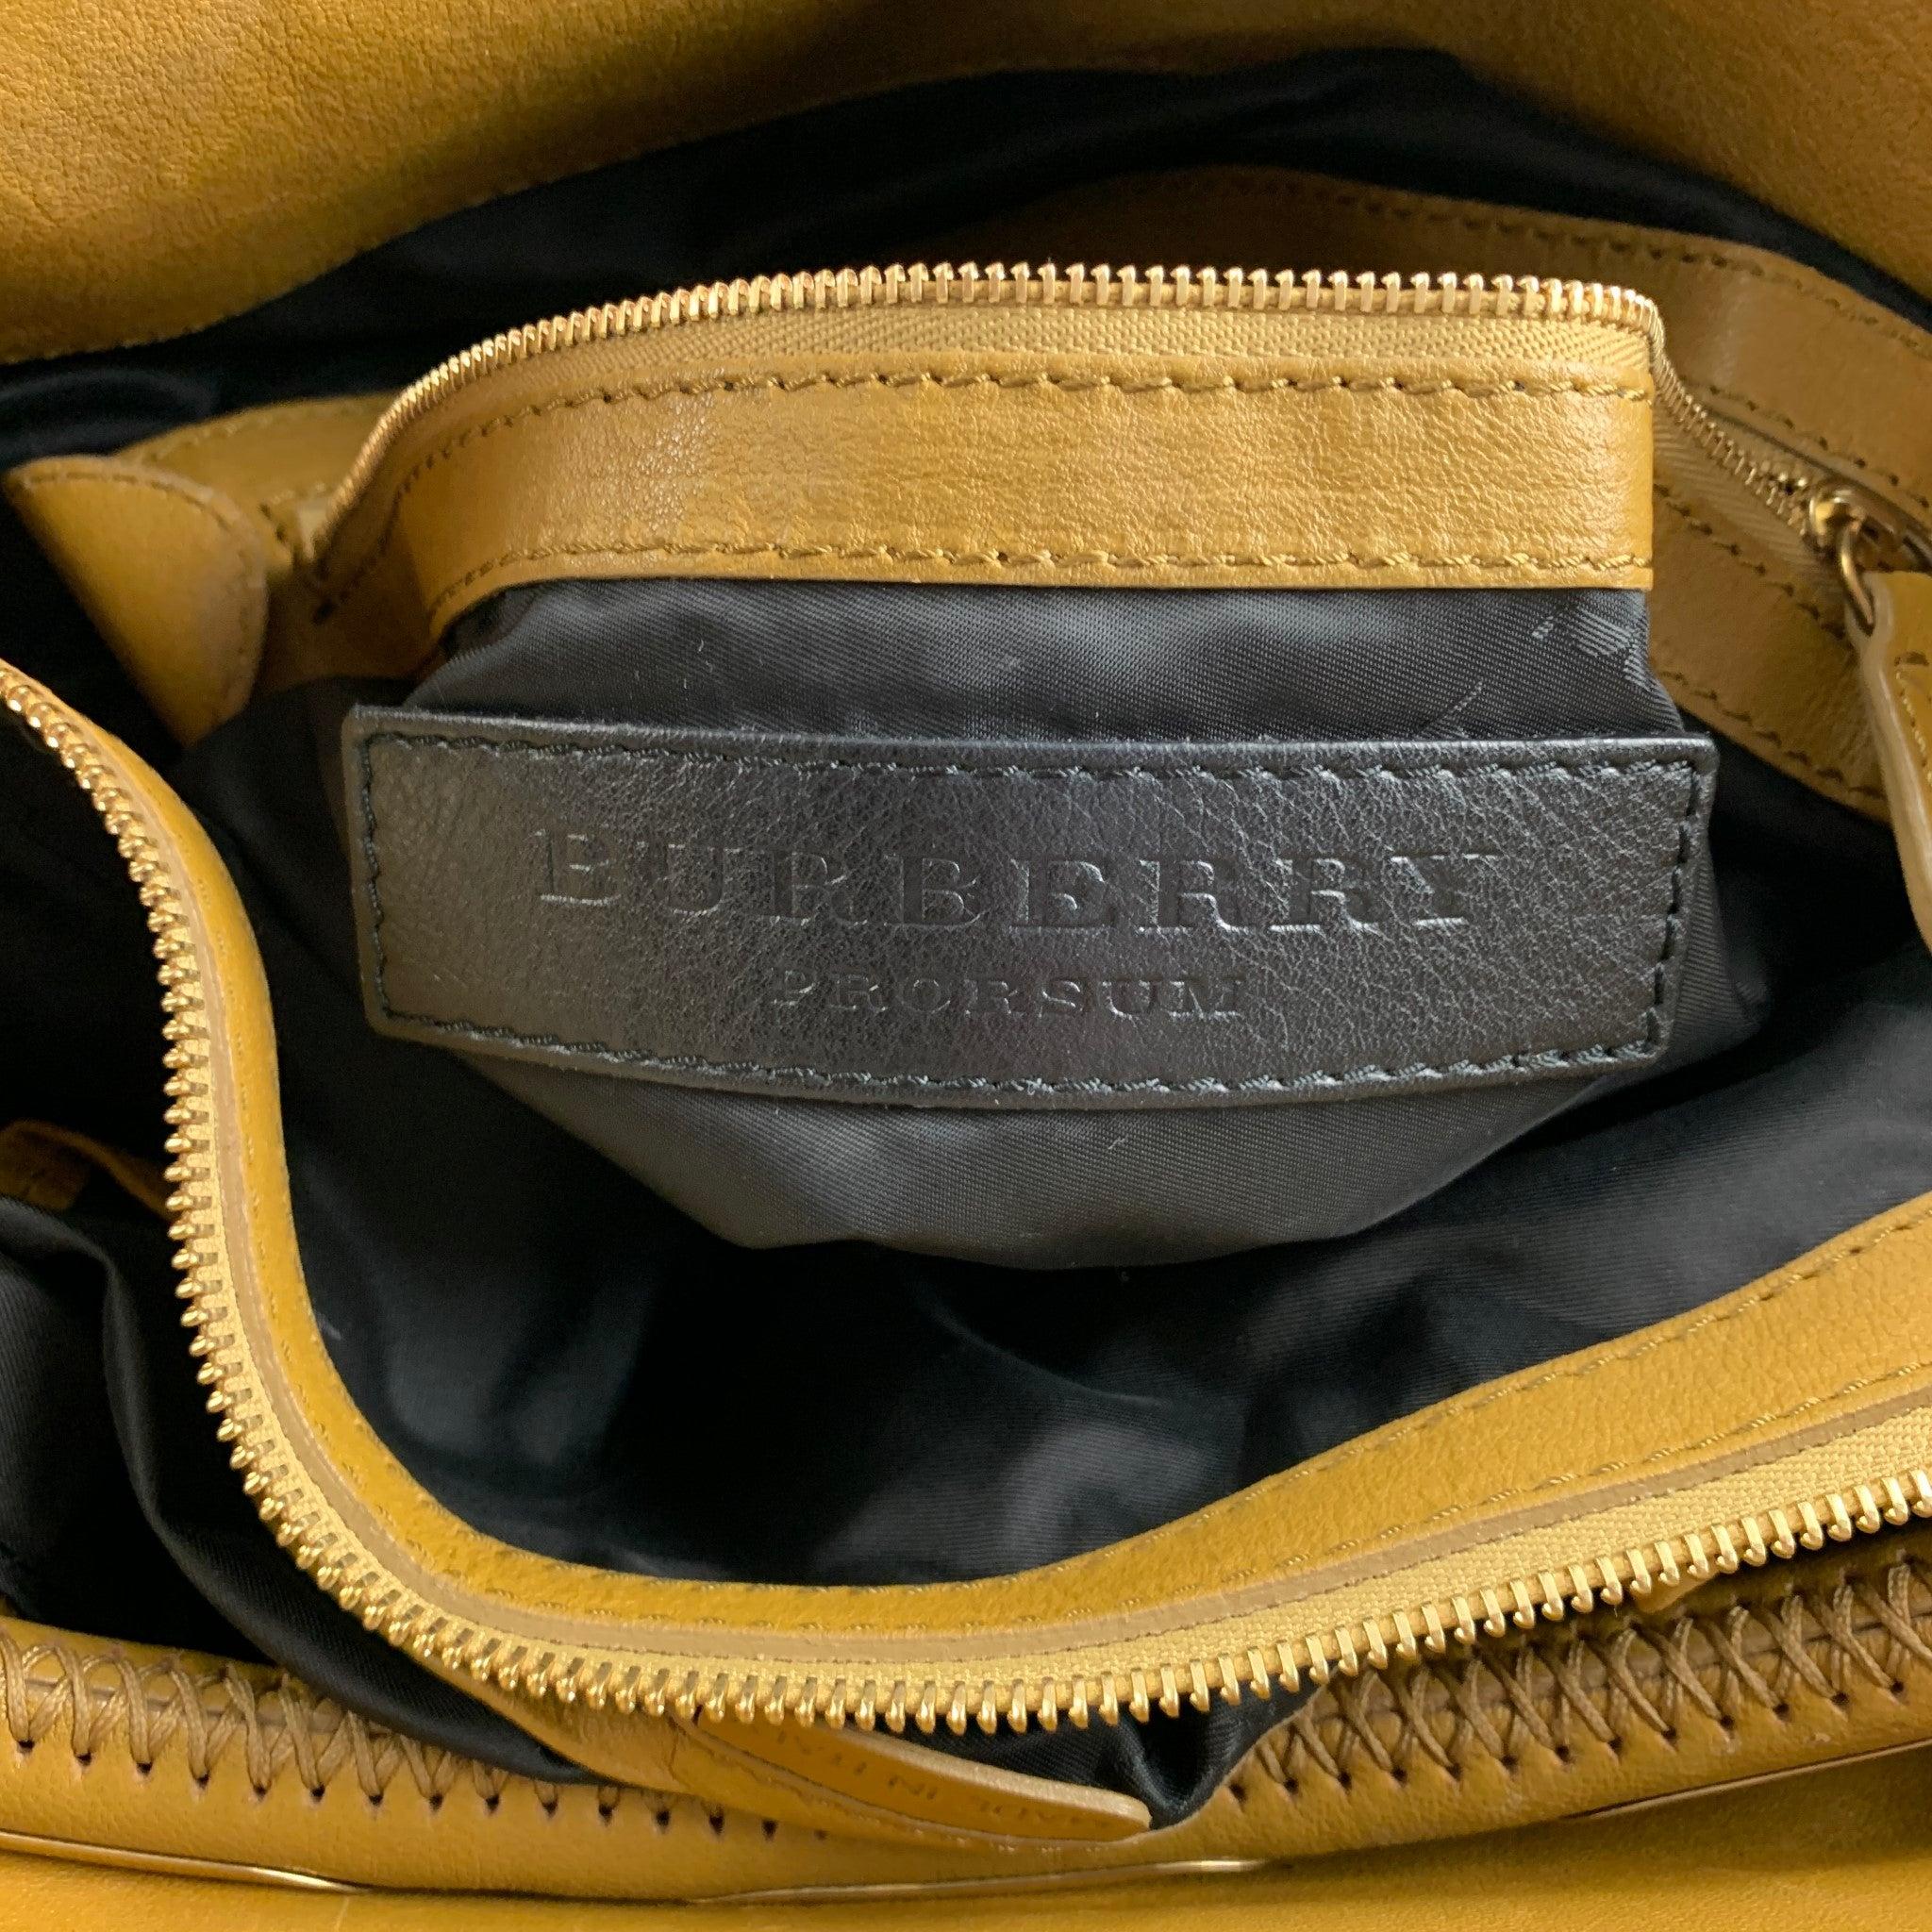 BURBERRY PRORSUM Mustard Ruched Leather Tote Handbag For Sale 4